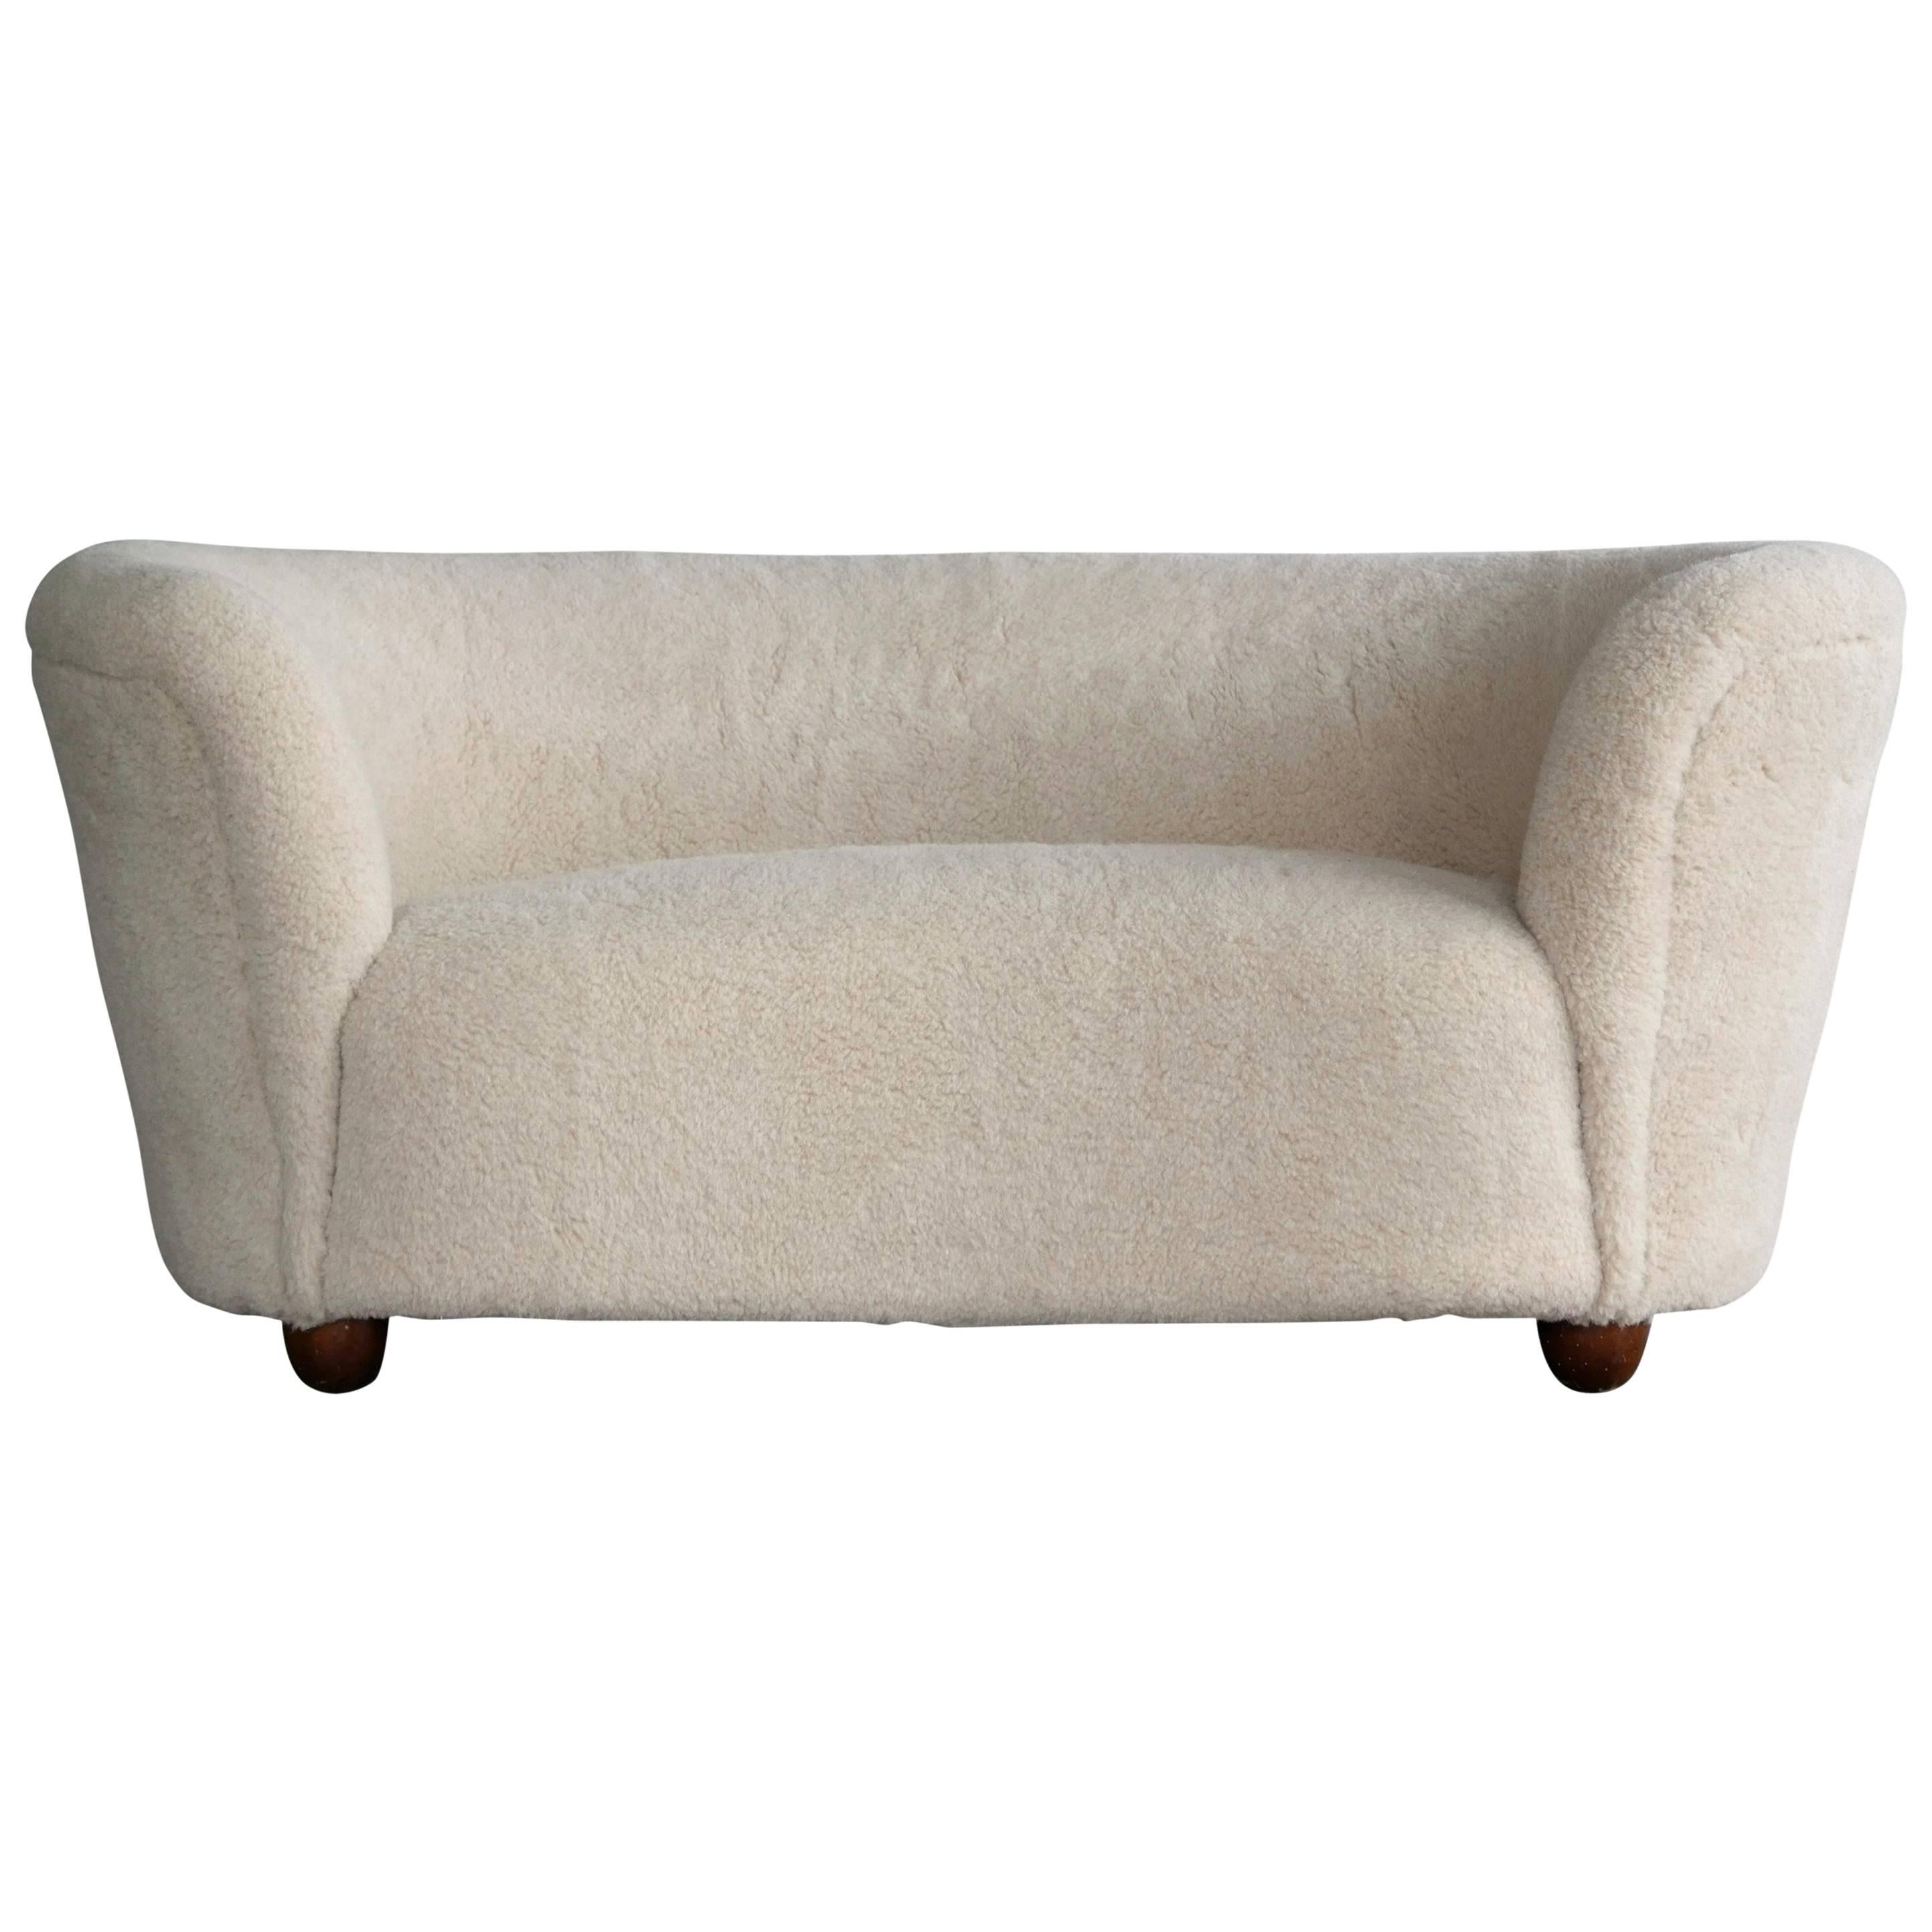 Viggo Boesen Style Curved Sofa or Loveseat in Lambswool Attributed to Slagelse